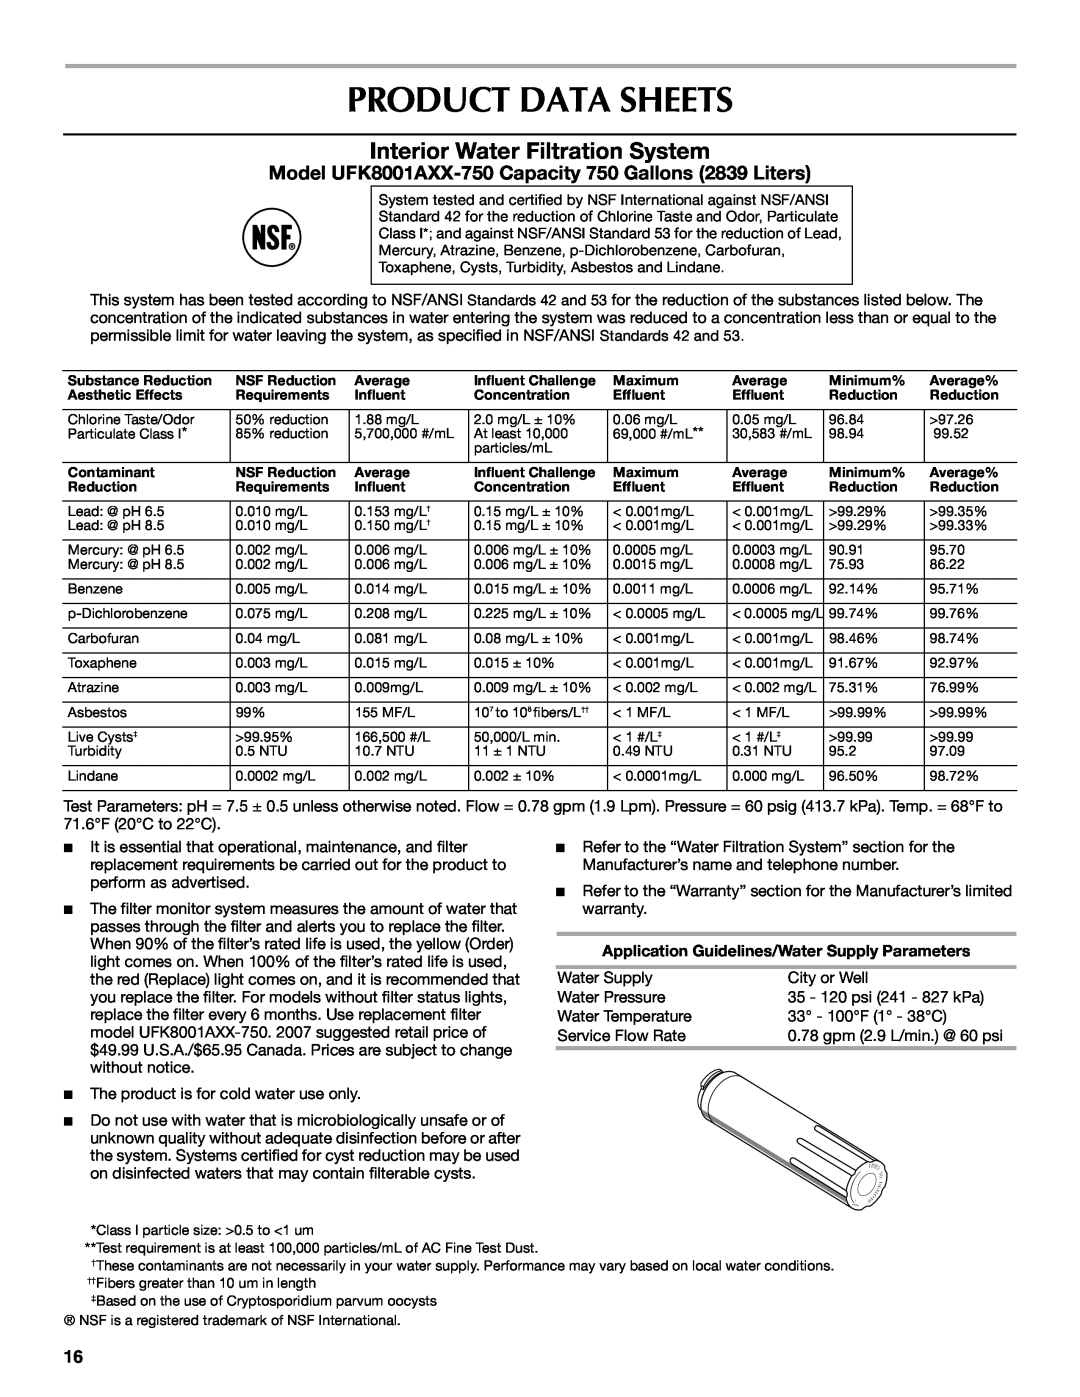 Maytag 12828190A, 12828186A installation instructions Product Data Sheets, Interior Water Filtration System 